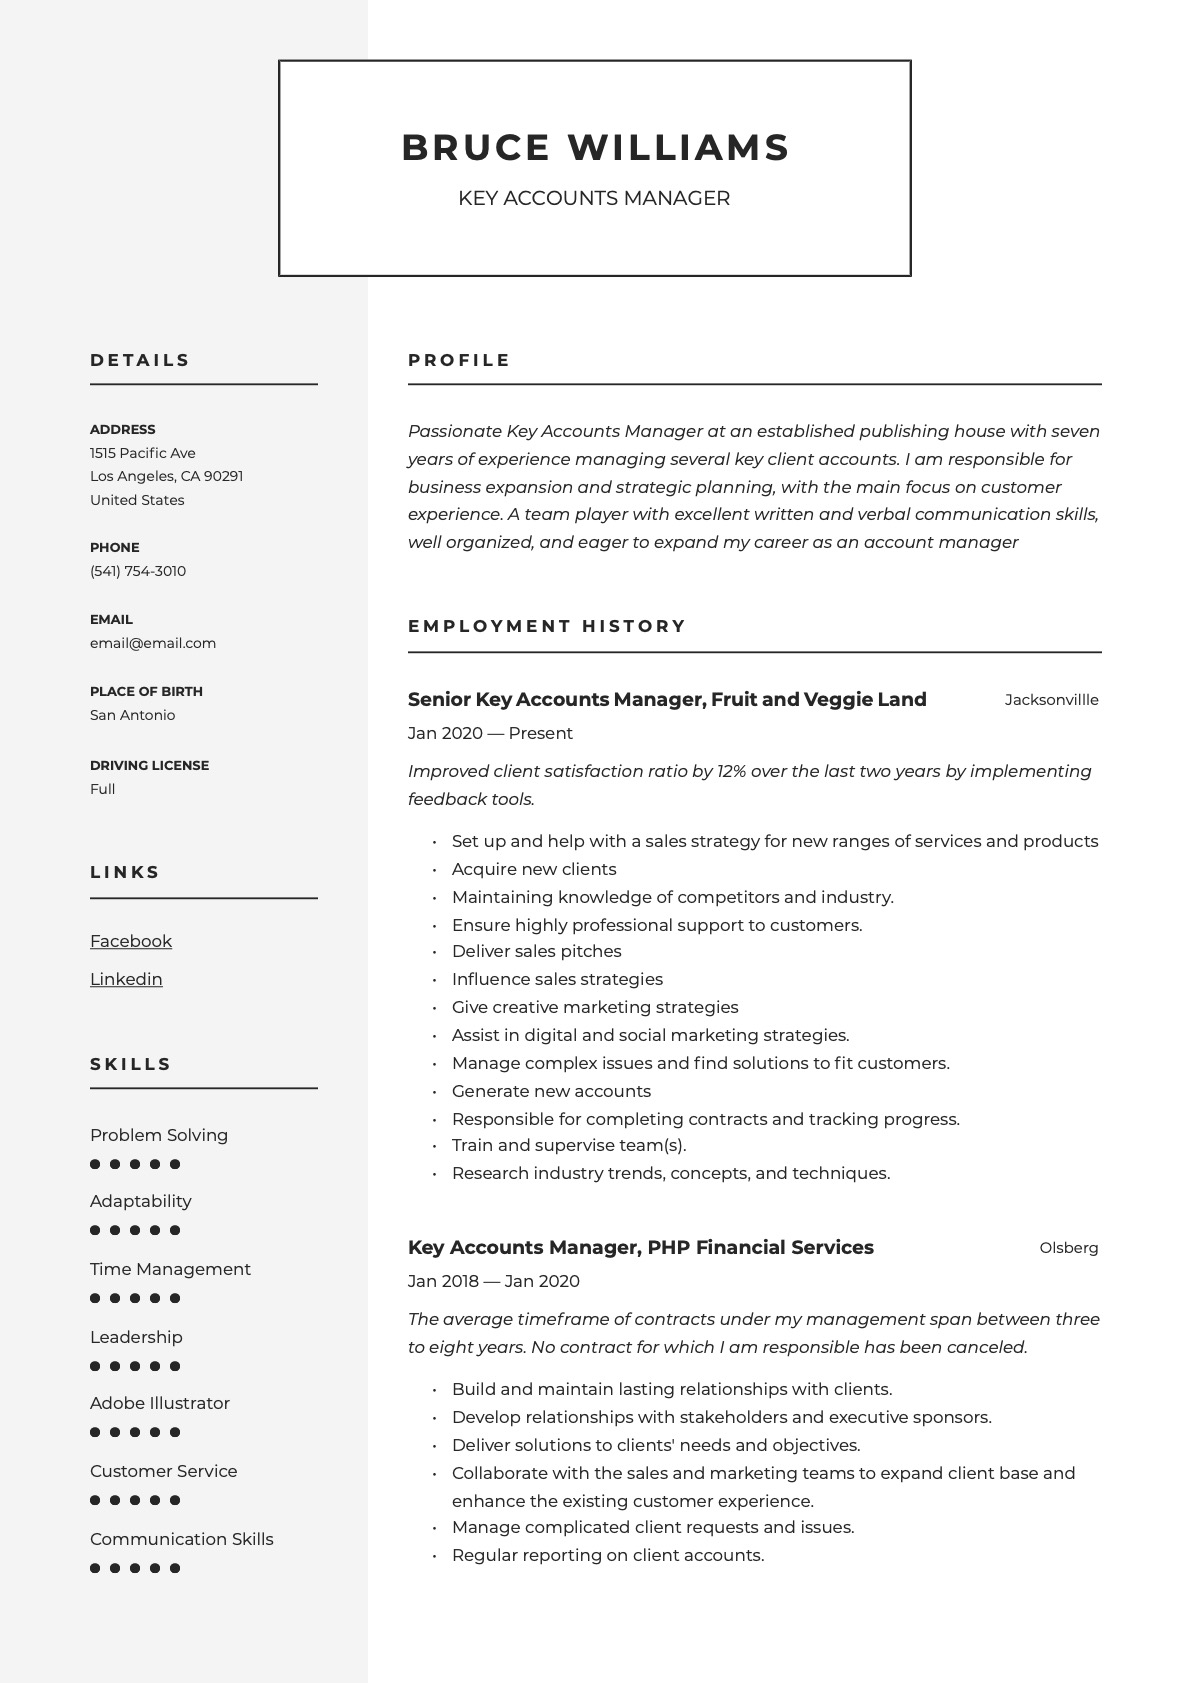 Example resume key accounts manager-8